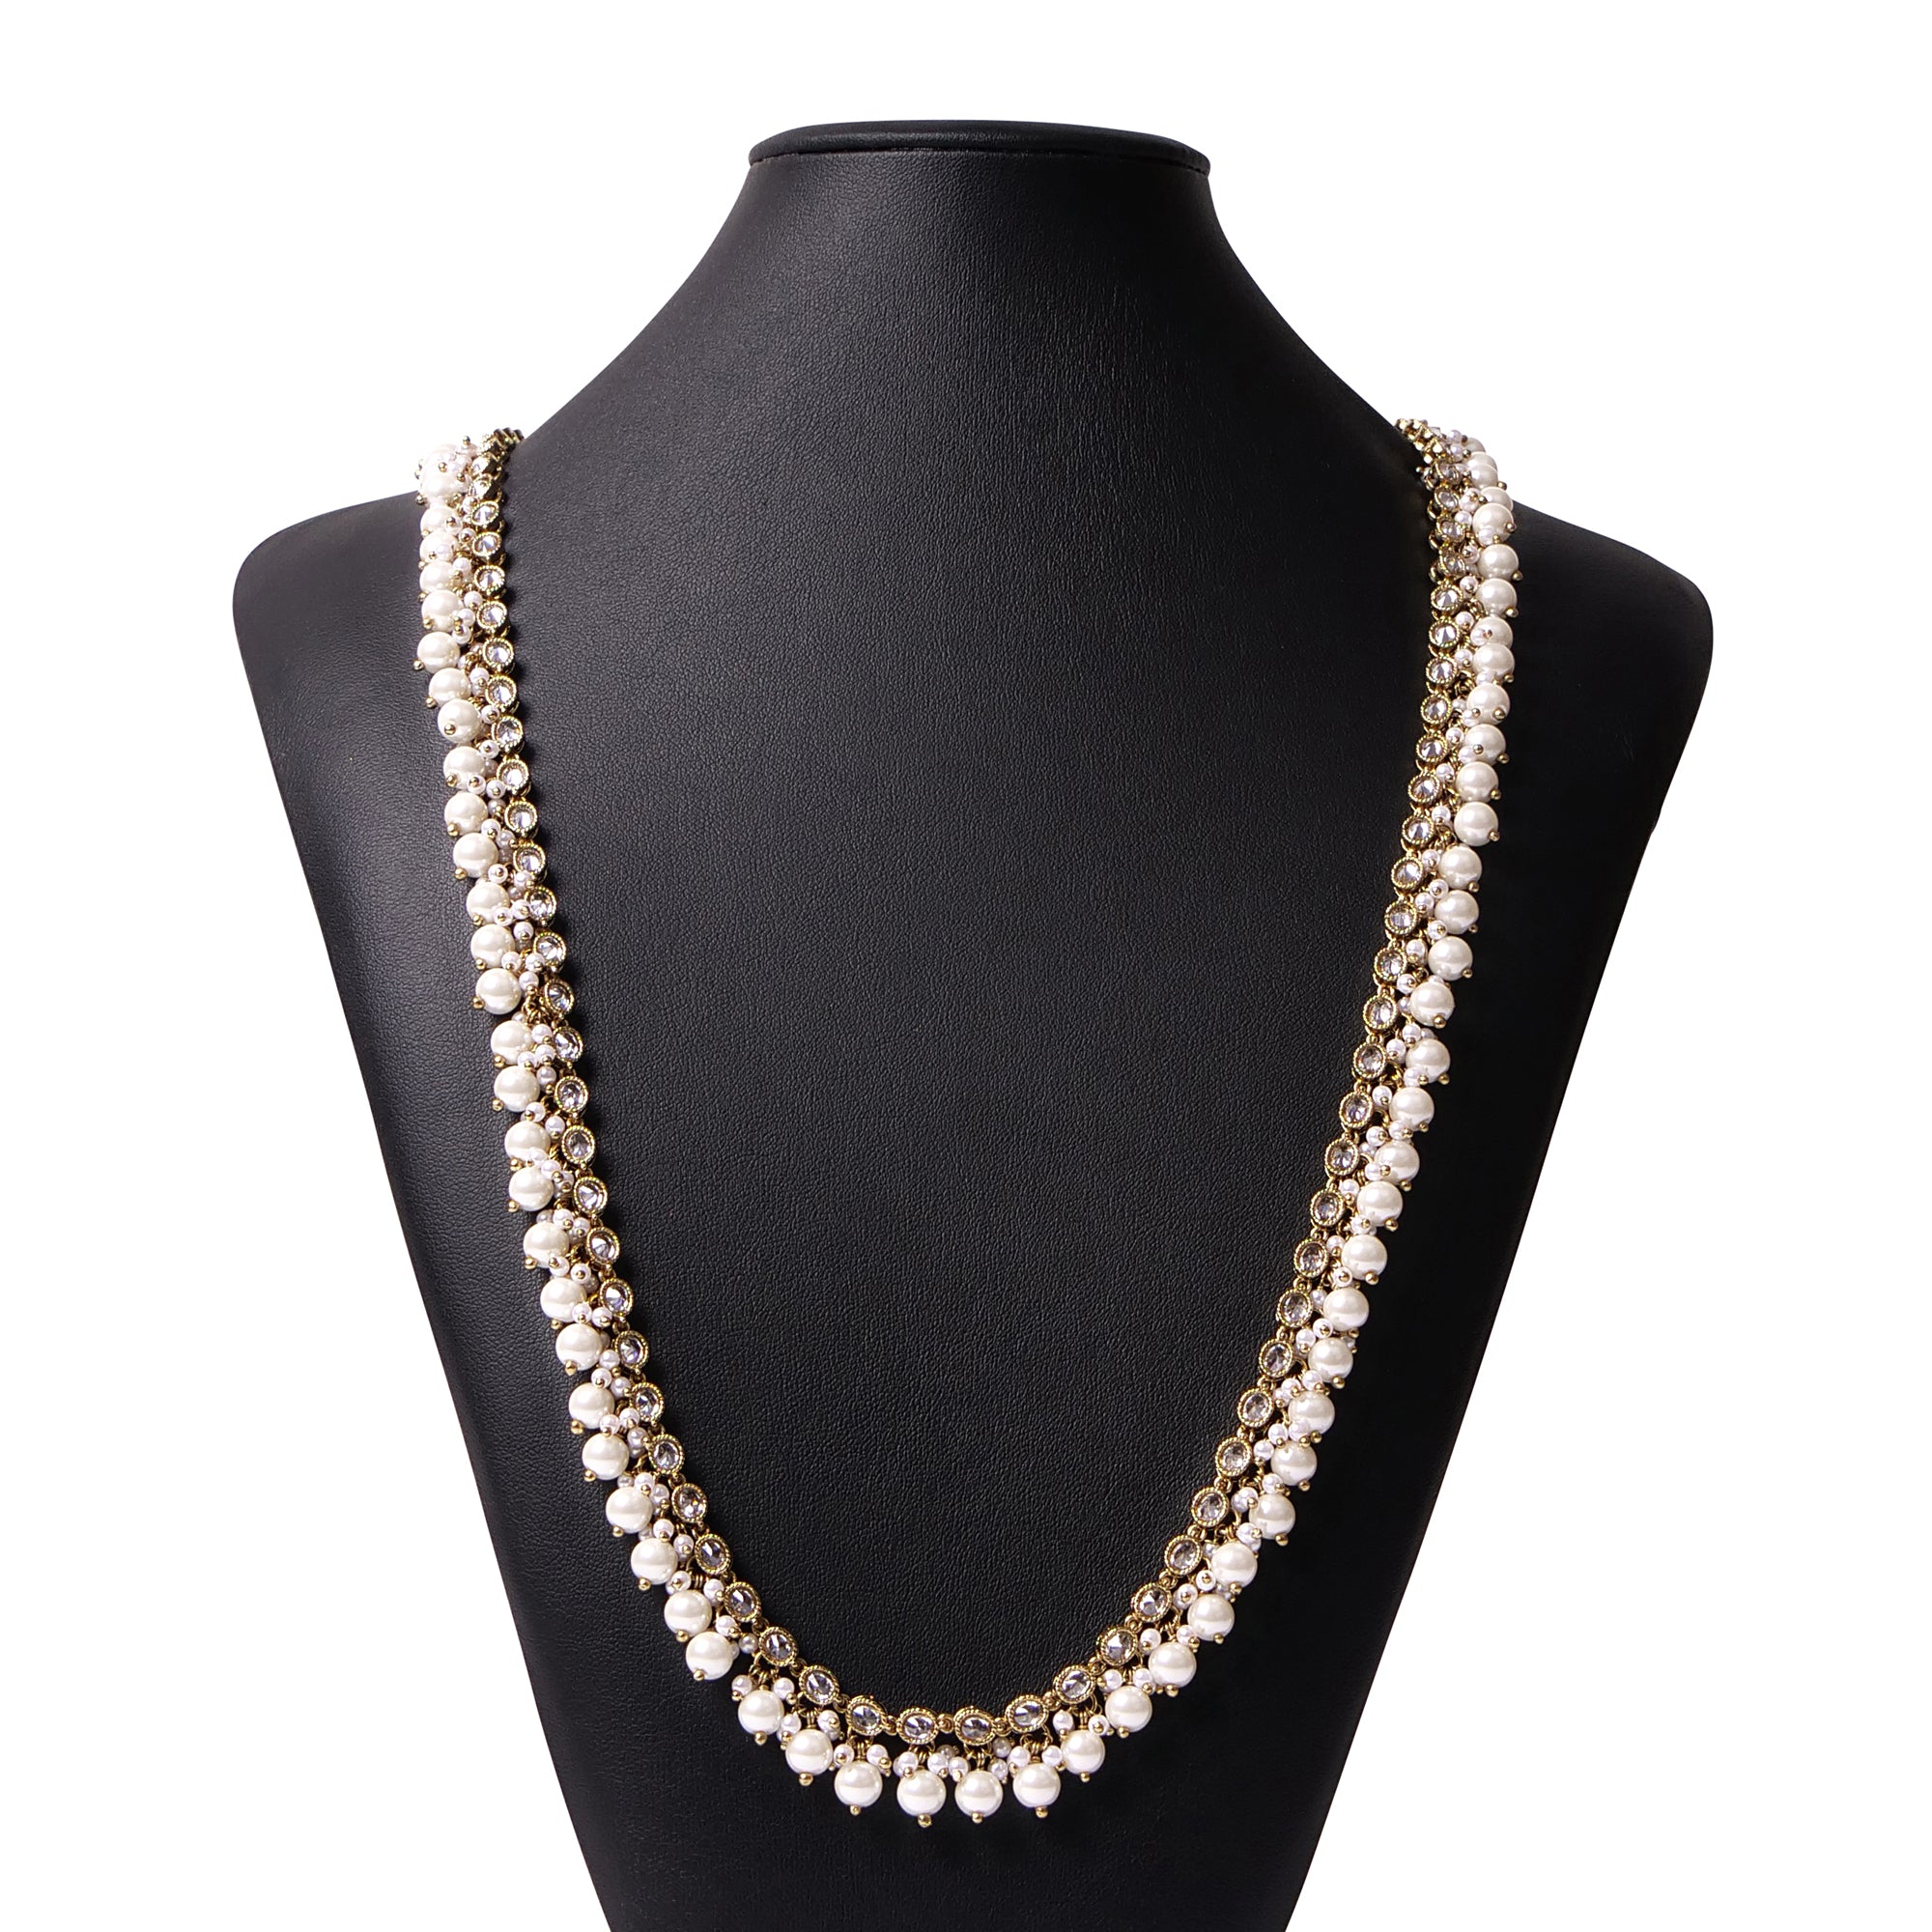 Layla Long Chain in White Pearl